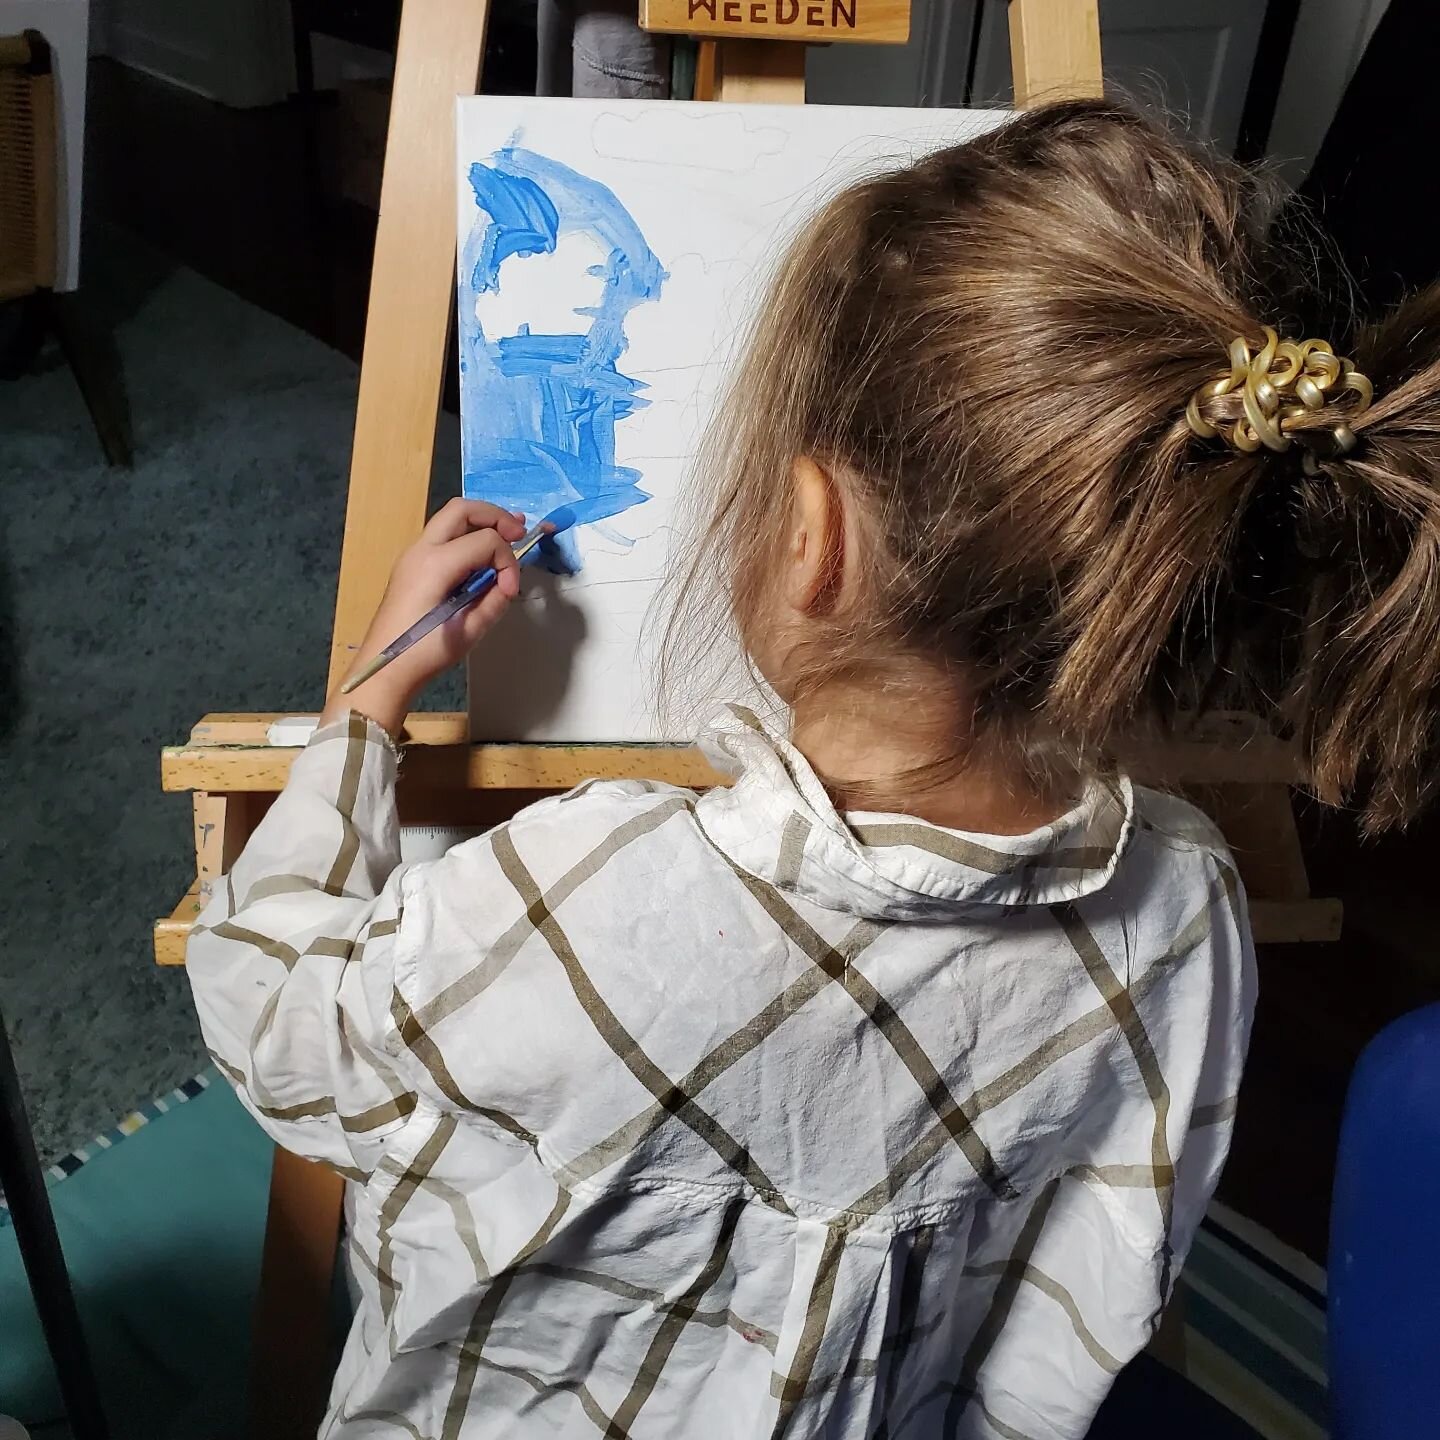 5 yo granddaughter, Madison, prepping for the art exhibit at the Mt. Lebanon Library that she's sharing with her mom. Stop and see their artwork in the lower gallery the month of October #kidspainting #mtlebanonlibrary